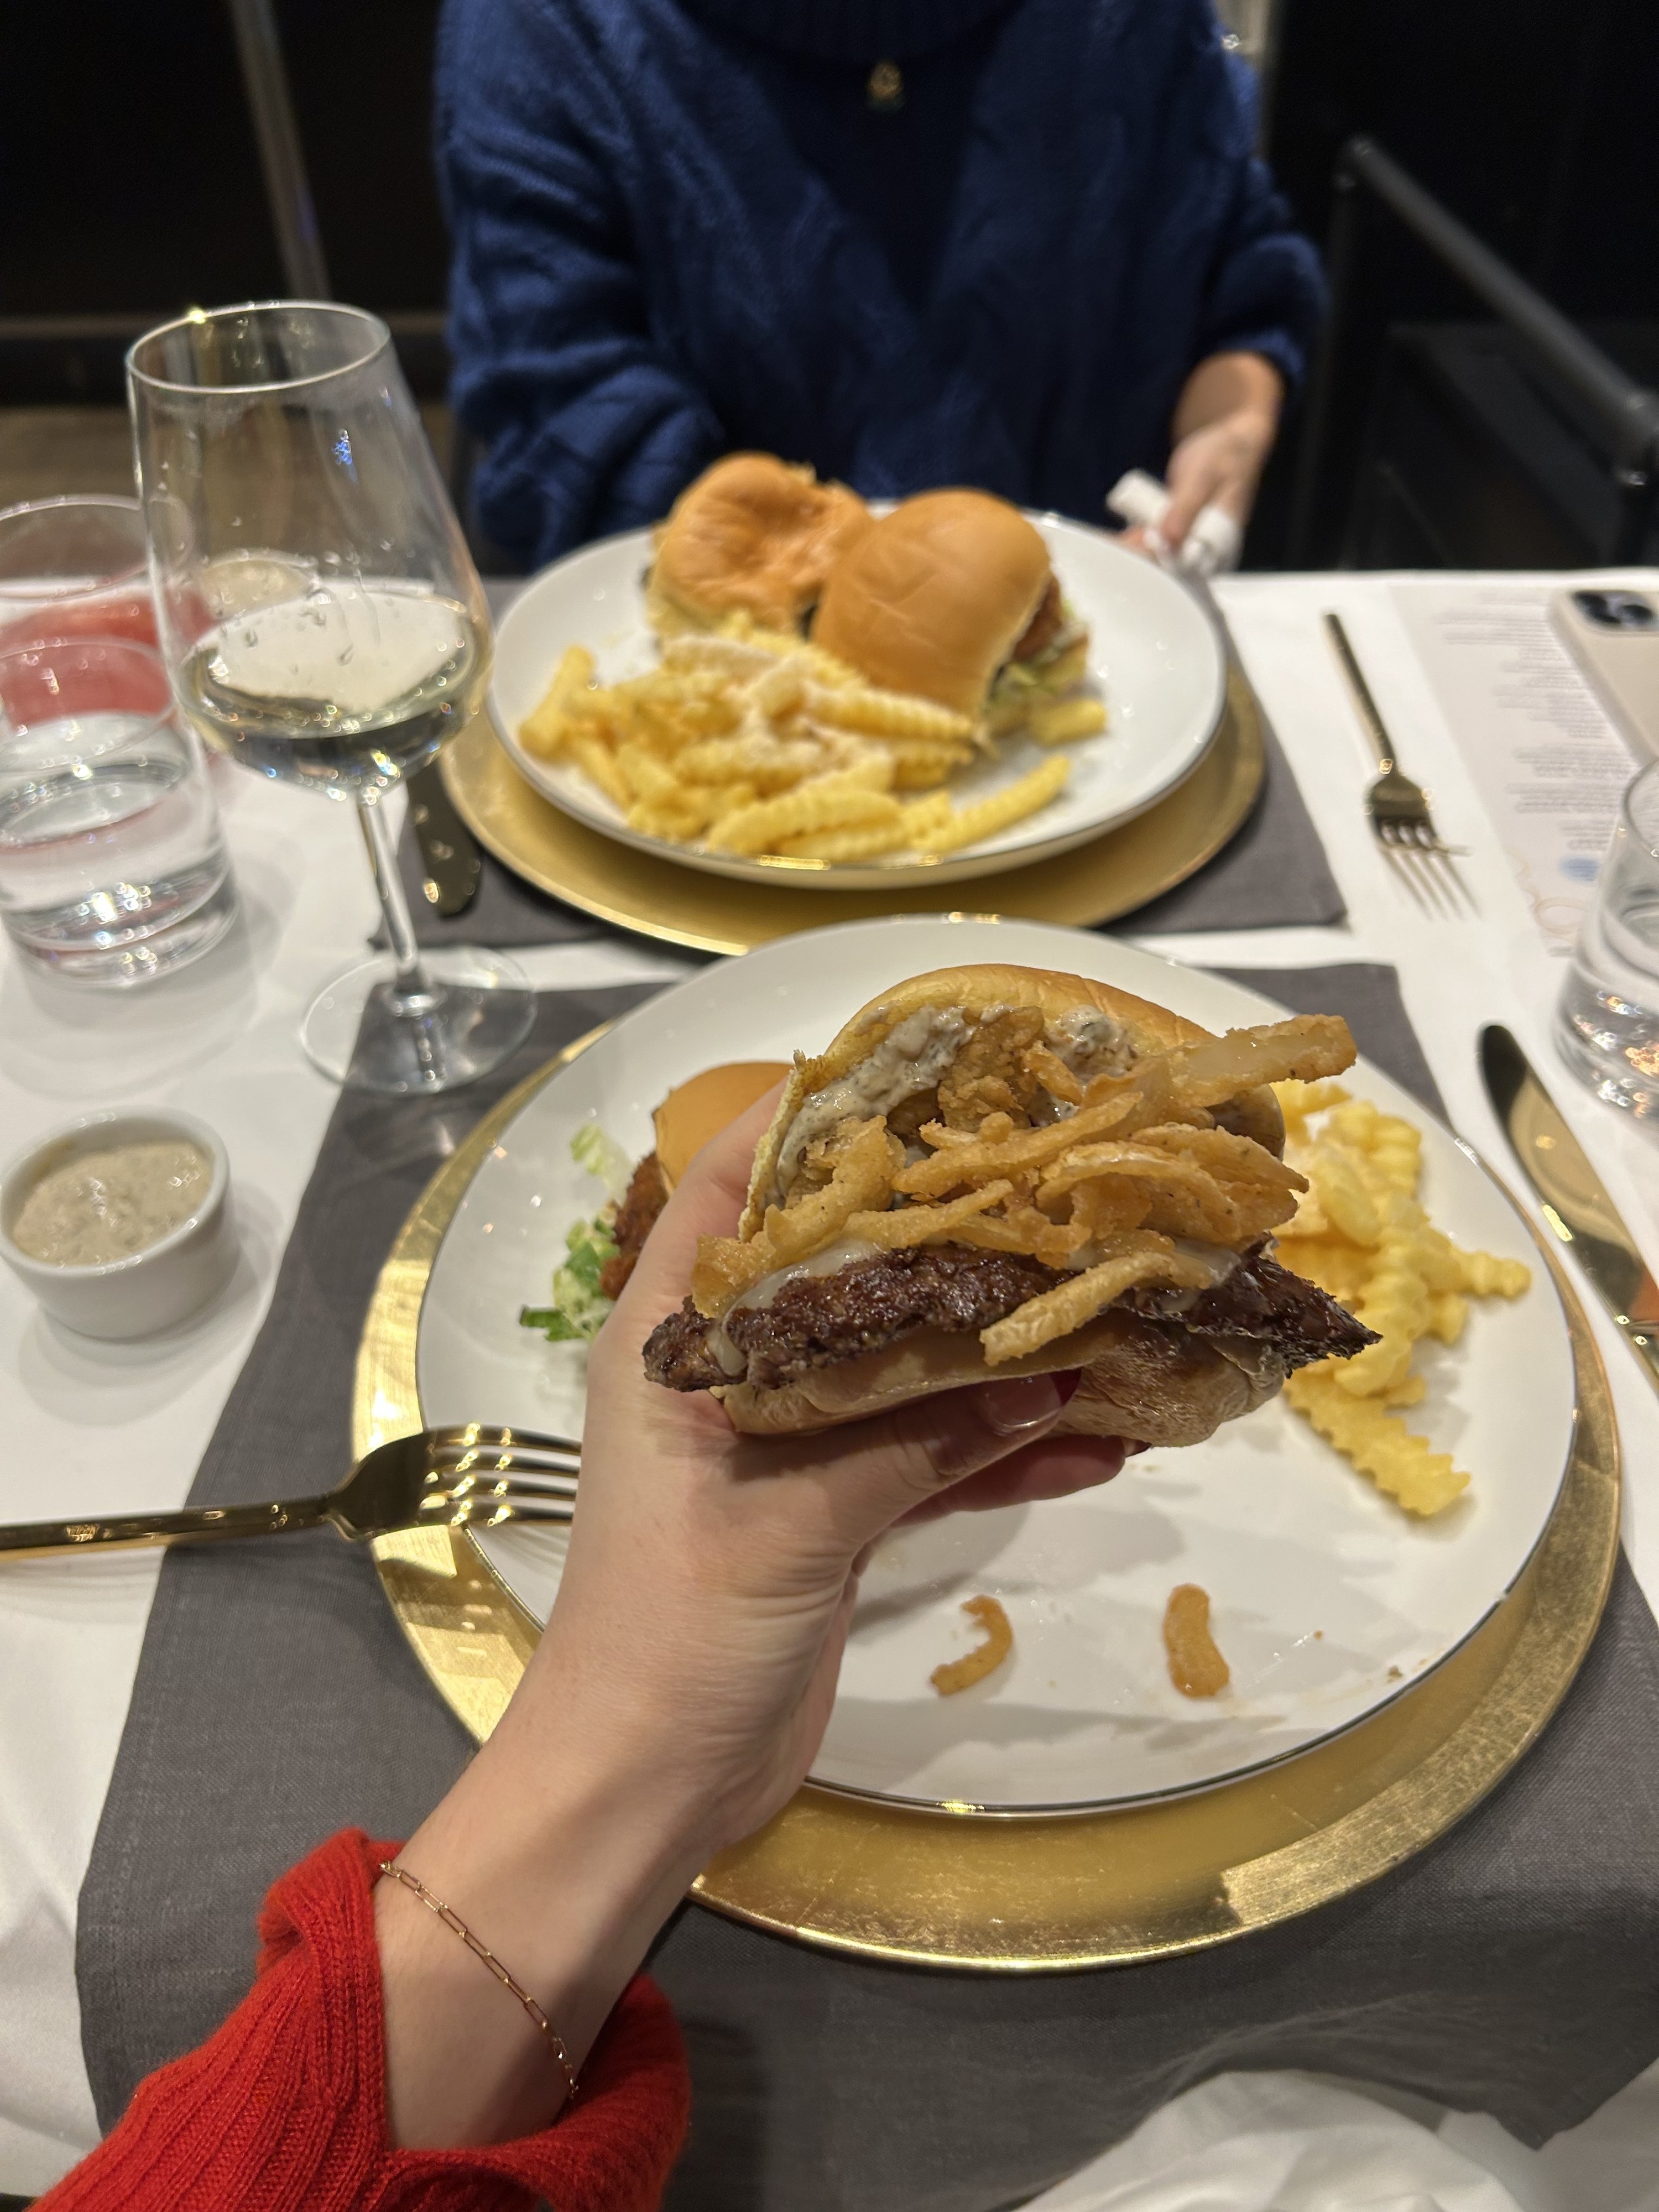 A hand holding the White Truffle Burger over a plate